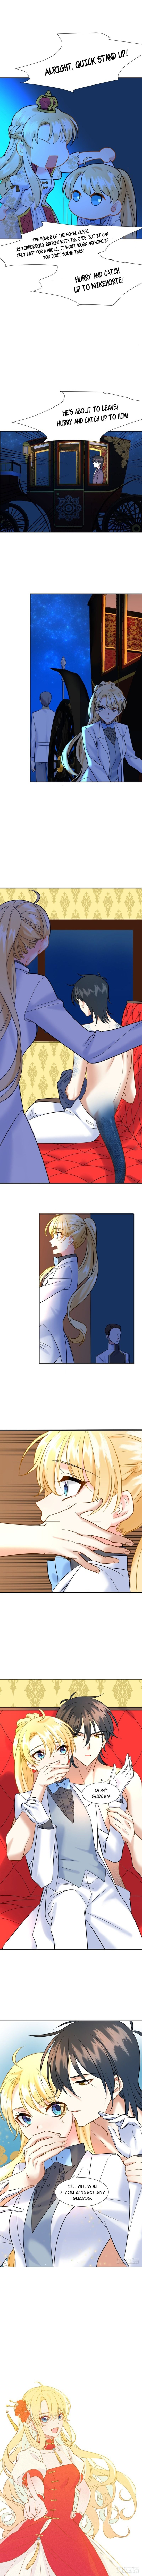 Destined Pair? I Disagree! chapter 7 - page 9